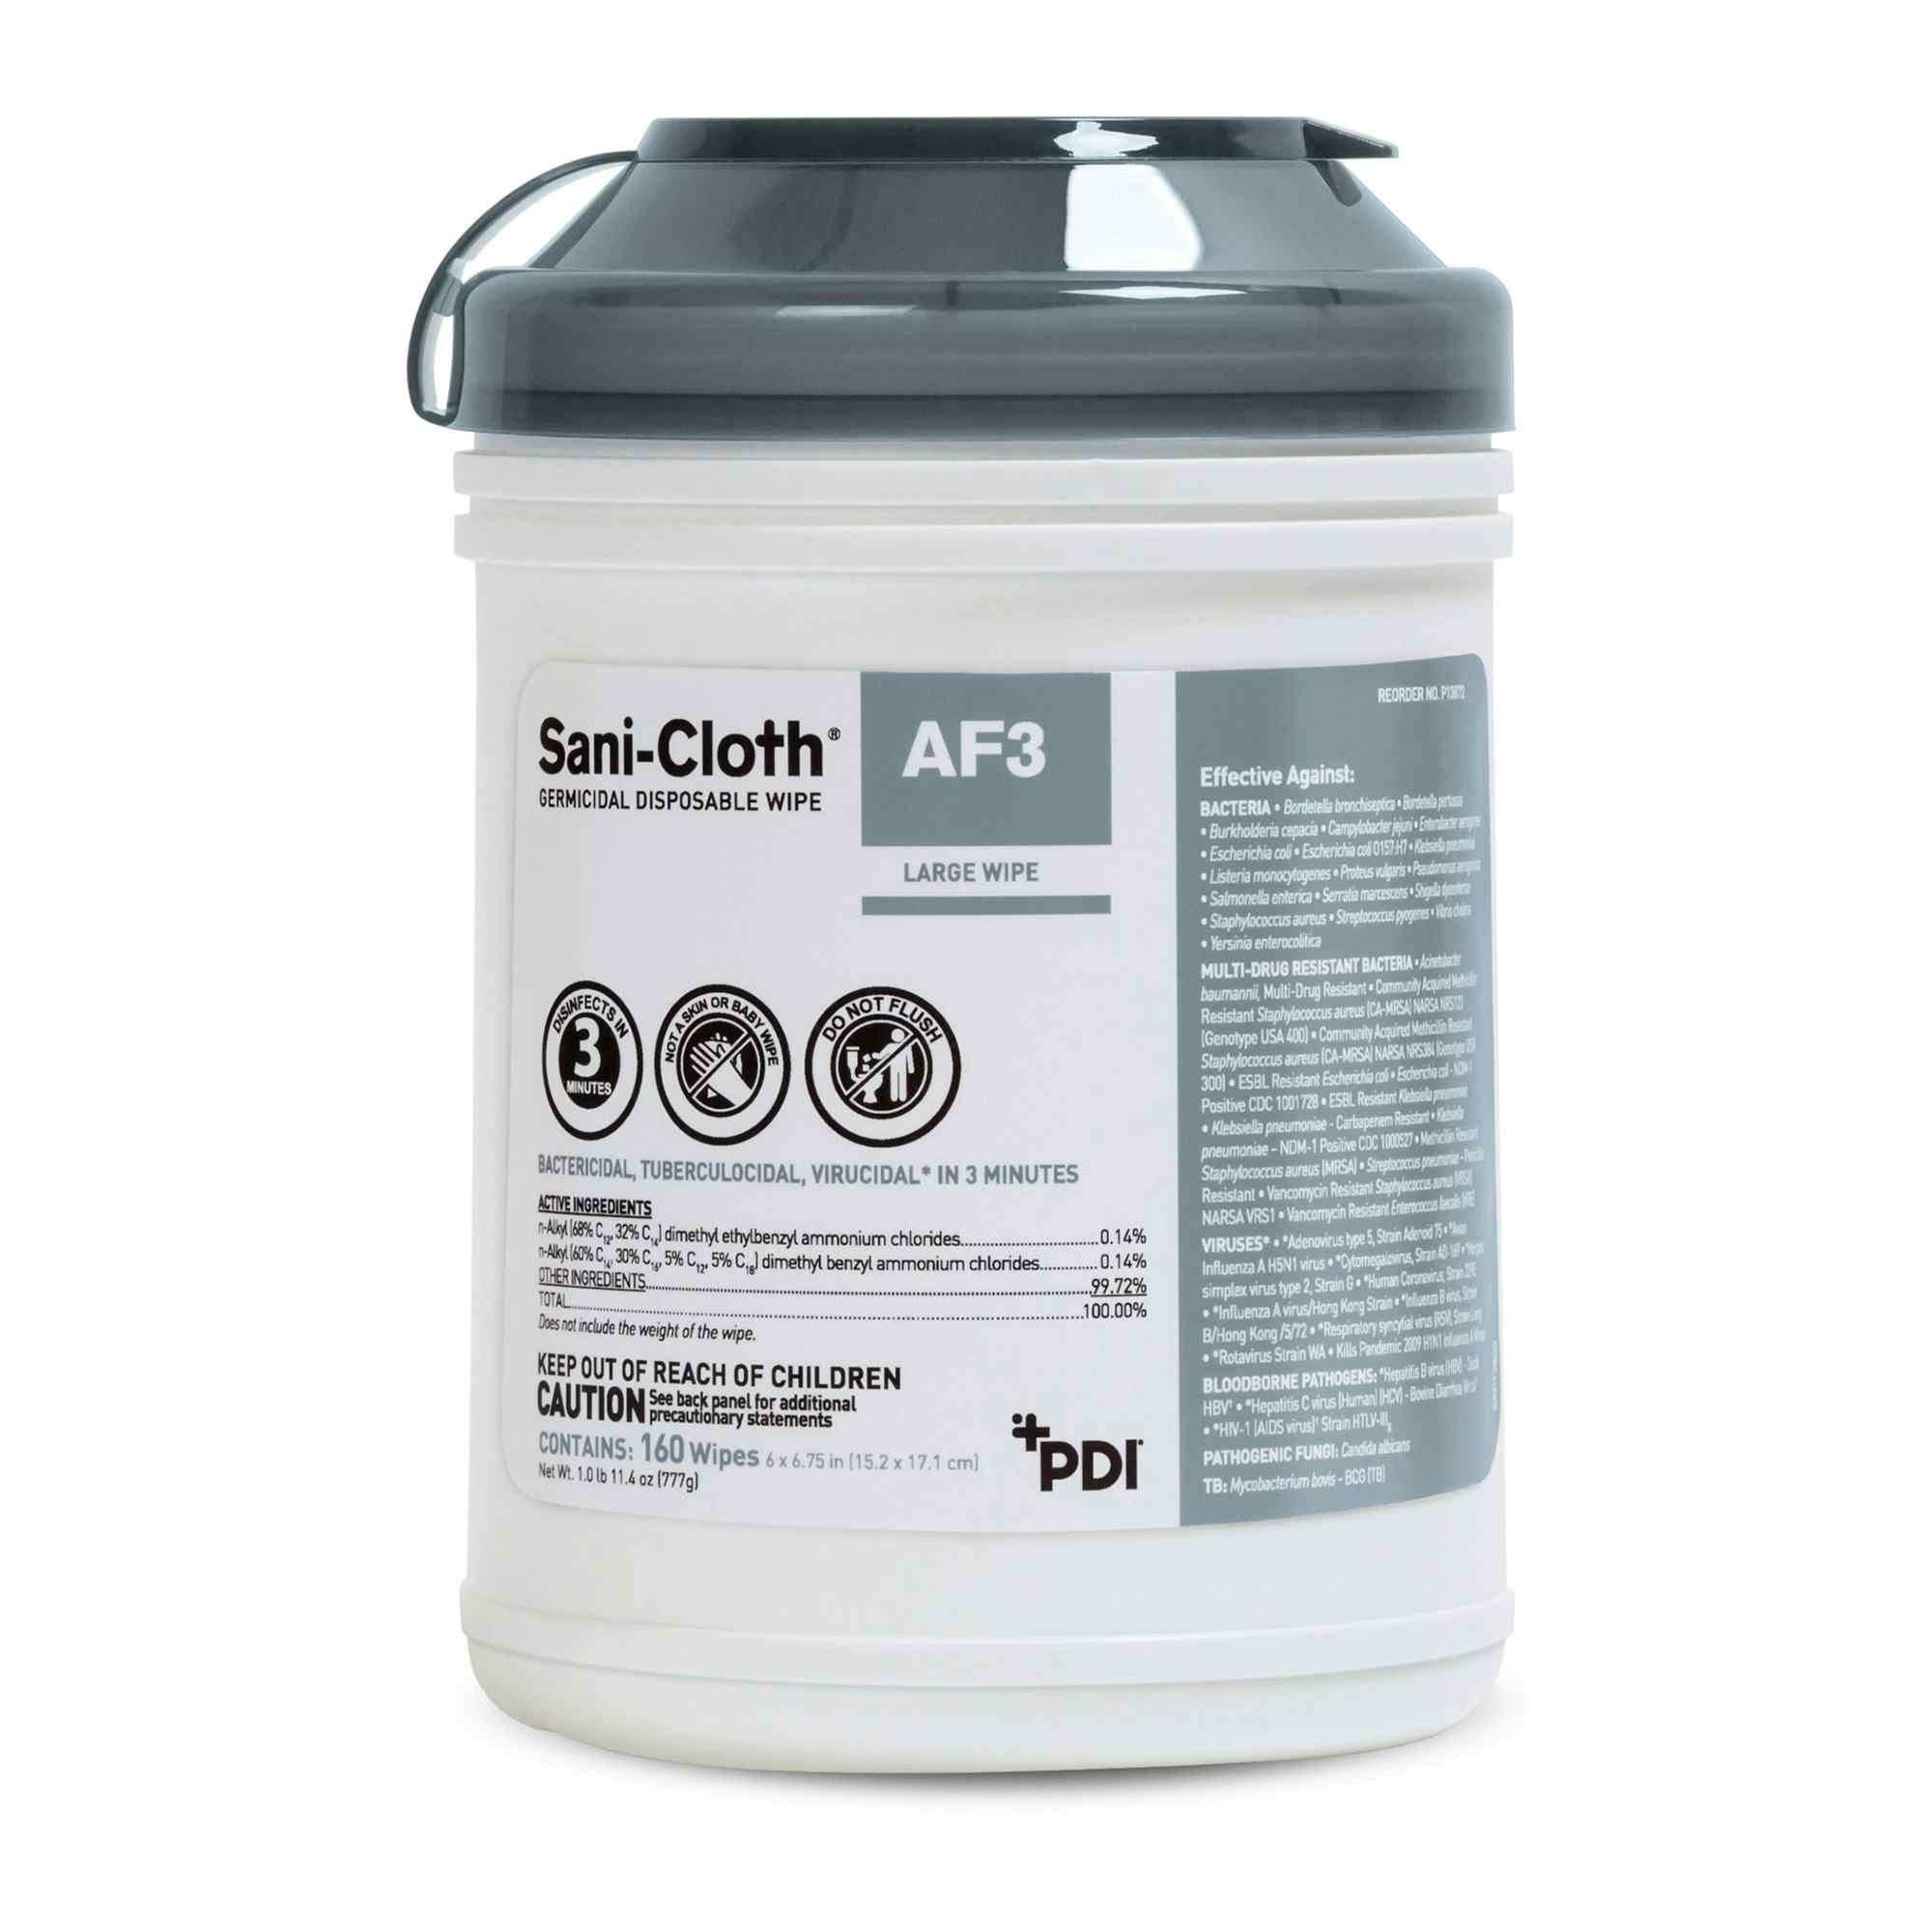 Sani-Cloth AF3 Surface Disinfectant Cleaner Wipe, 6 x 6-3/4", Large Canister